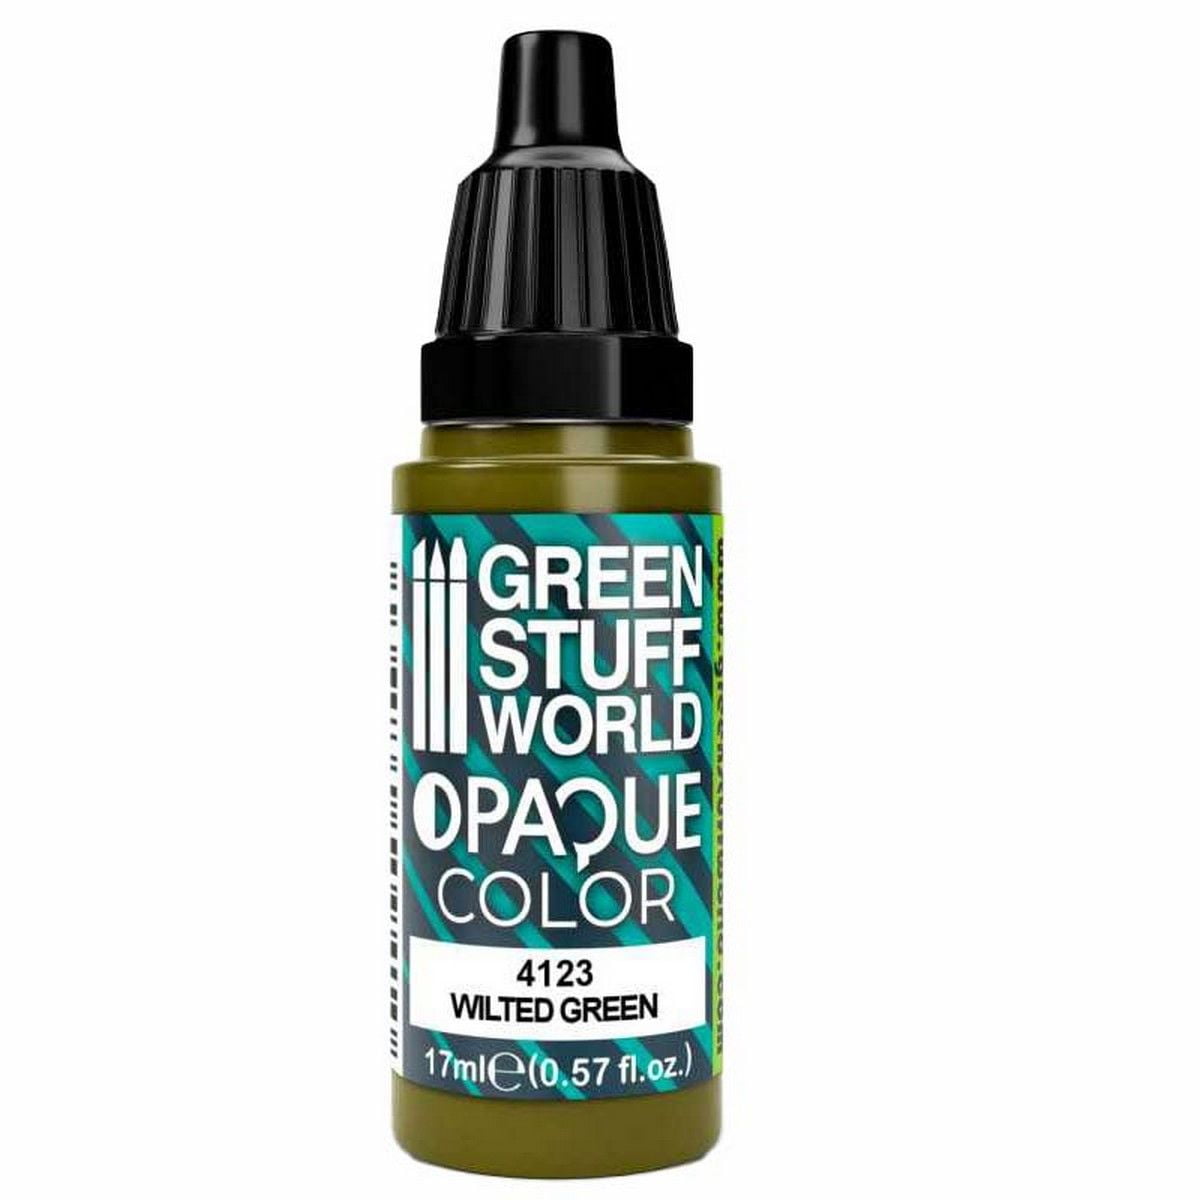 Opaque Colors - Wilted Green - 17ml